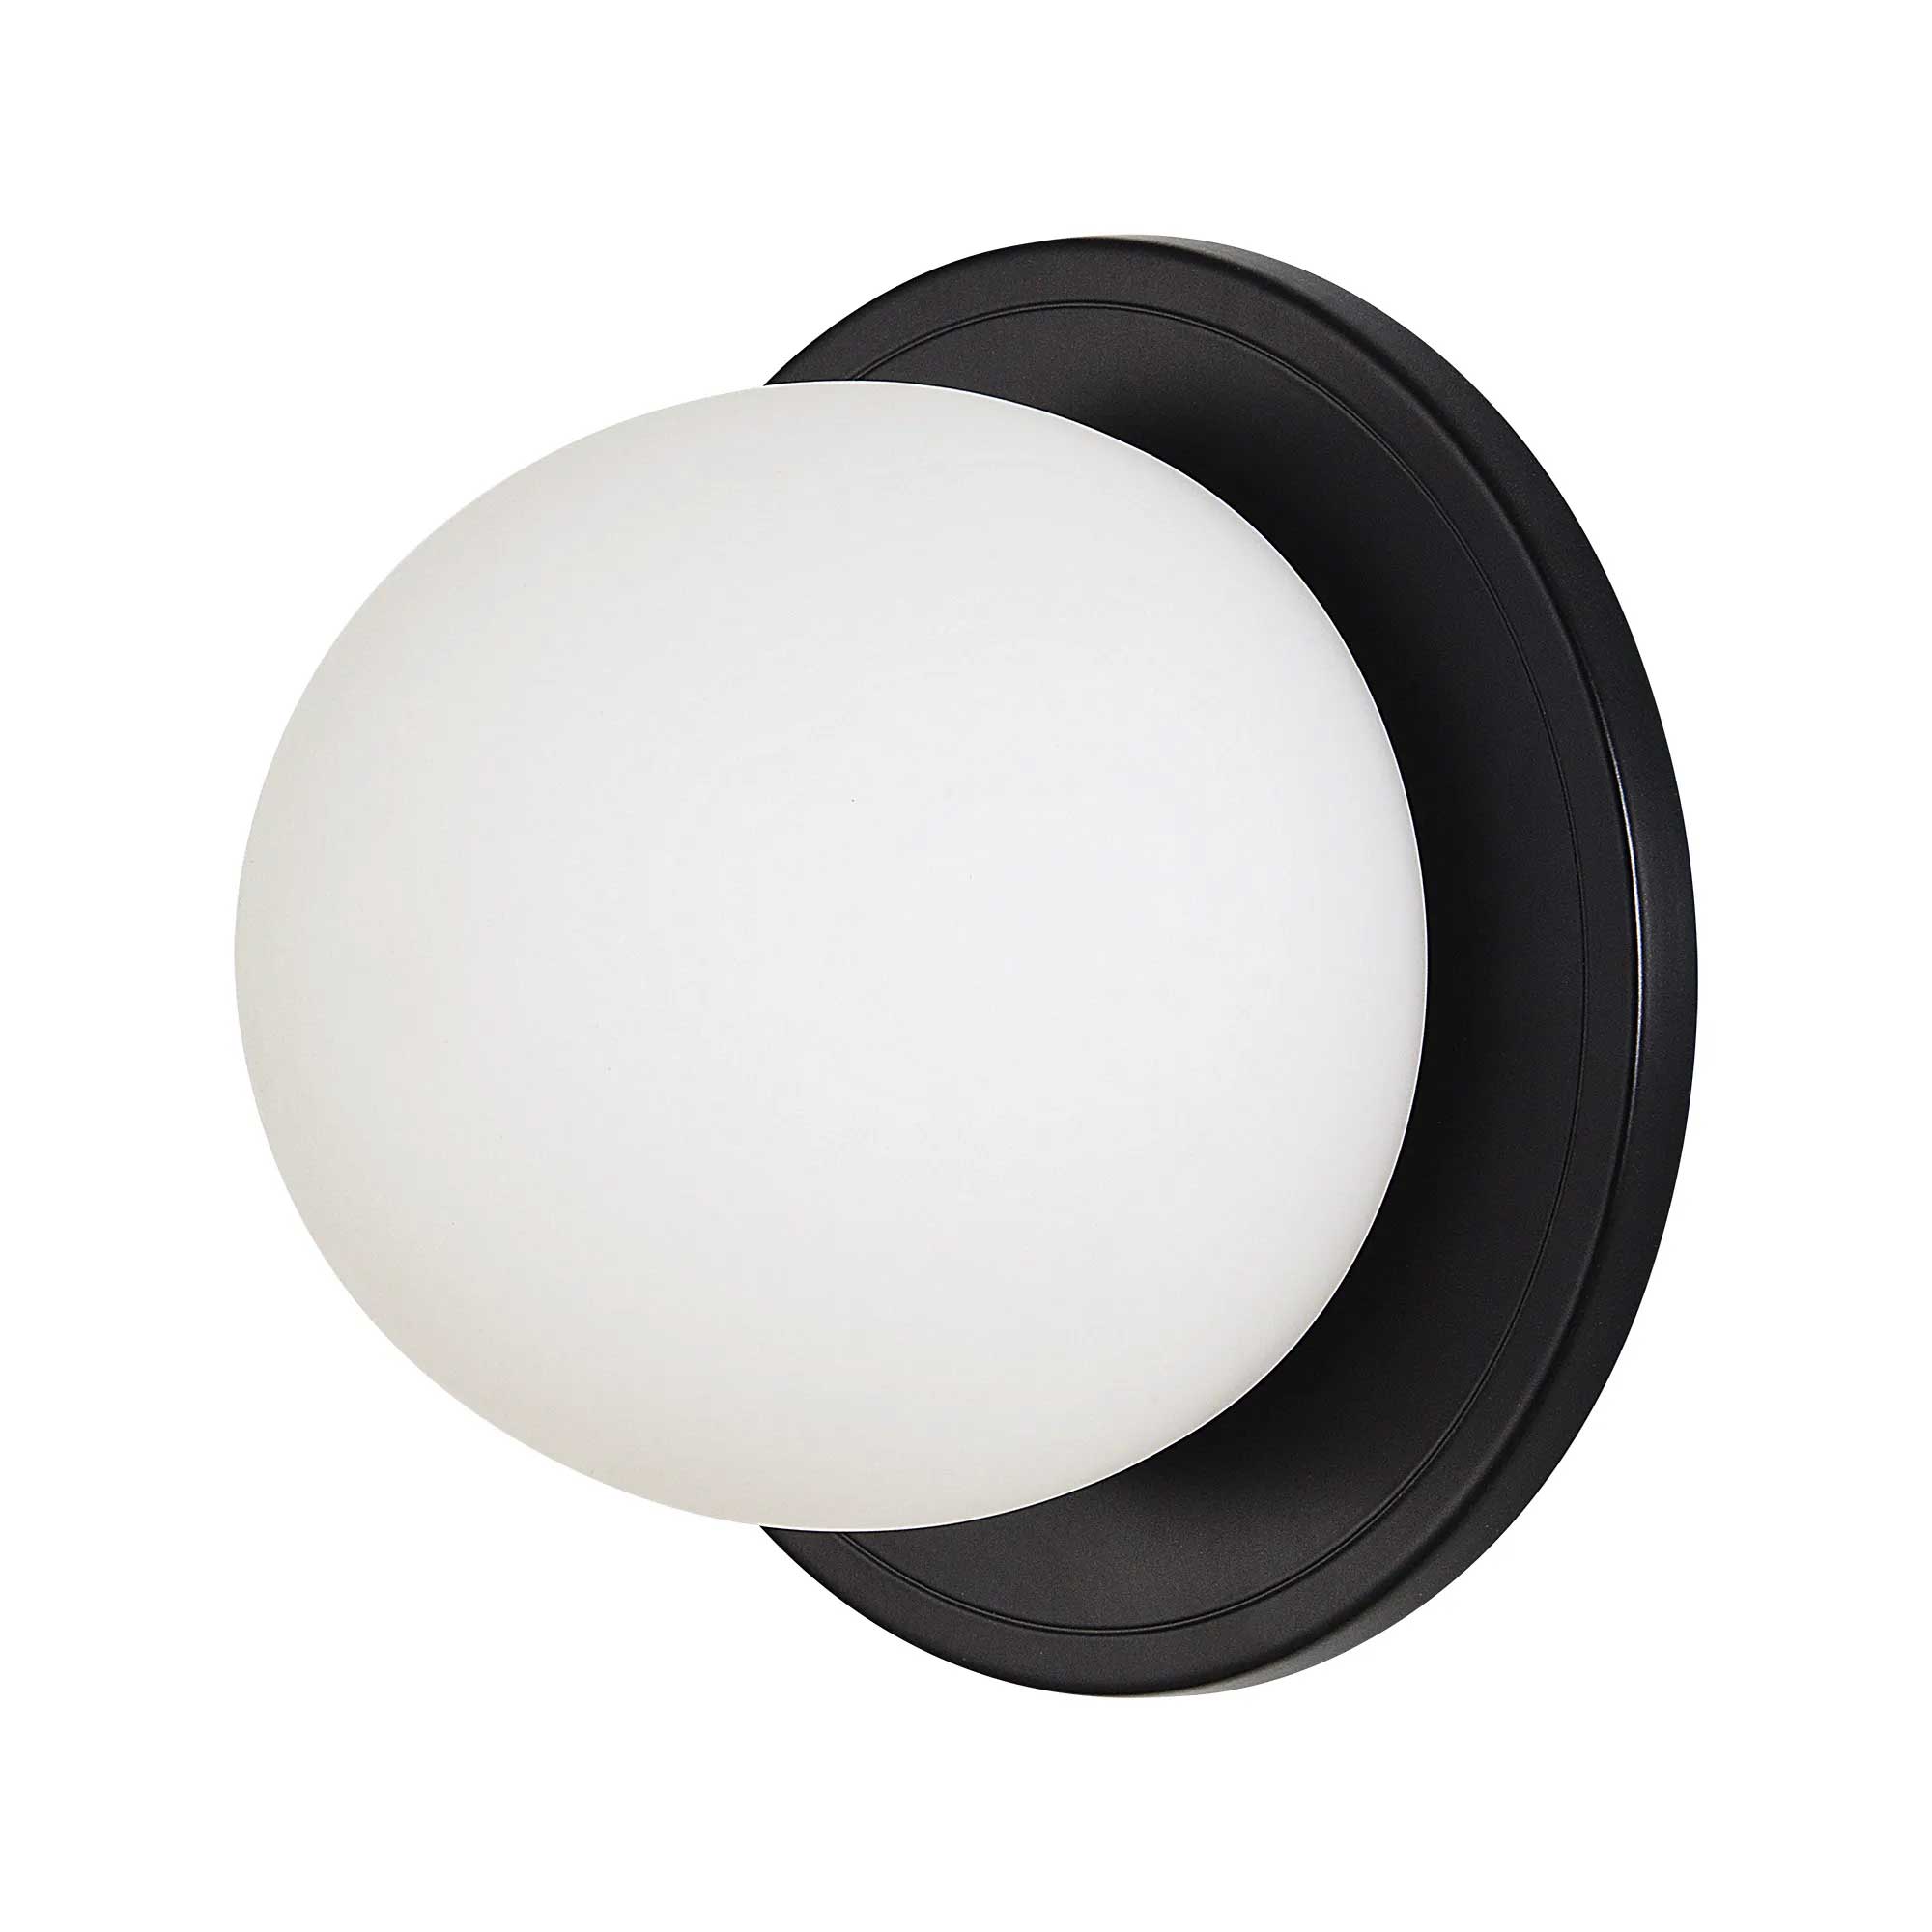 SYBIL Wall sconce Black - WS126 | RENWIL